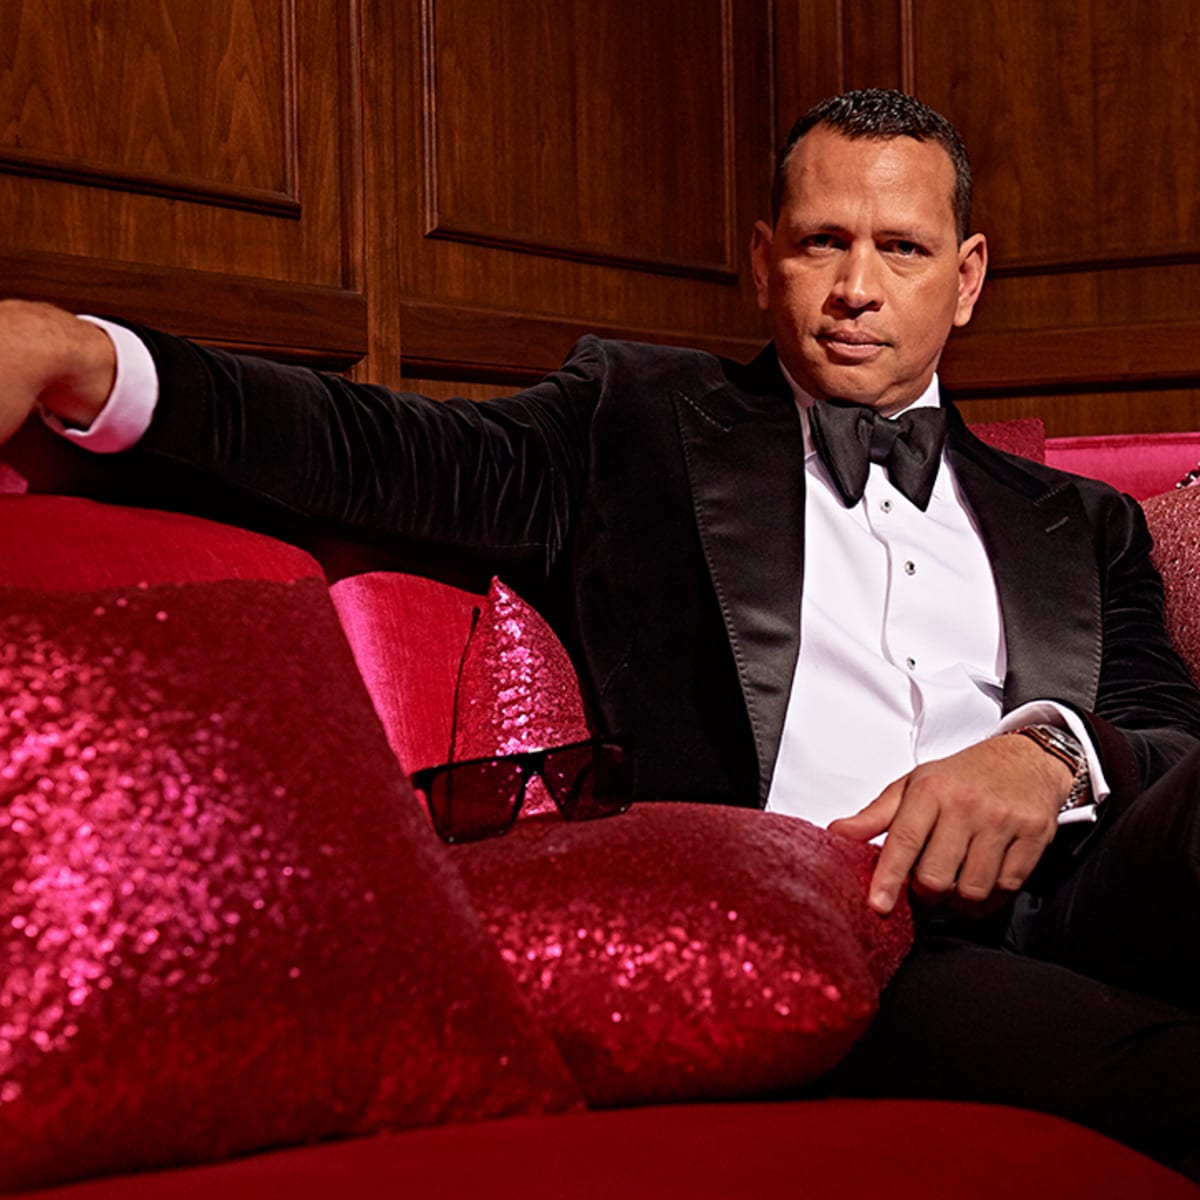 Fox reportedly made sure Alex Rodriguez approved before hiring